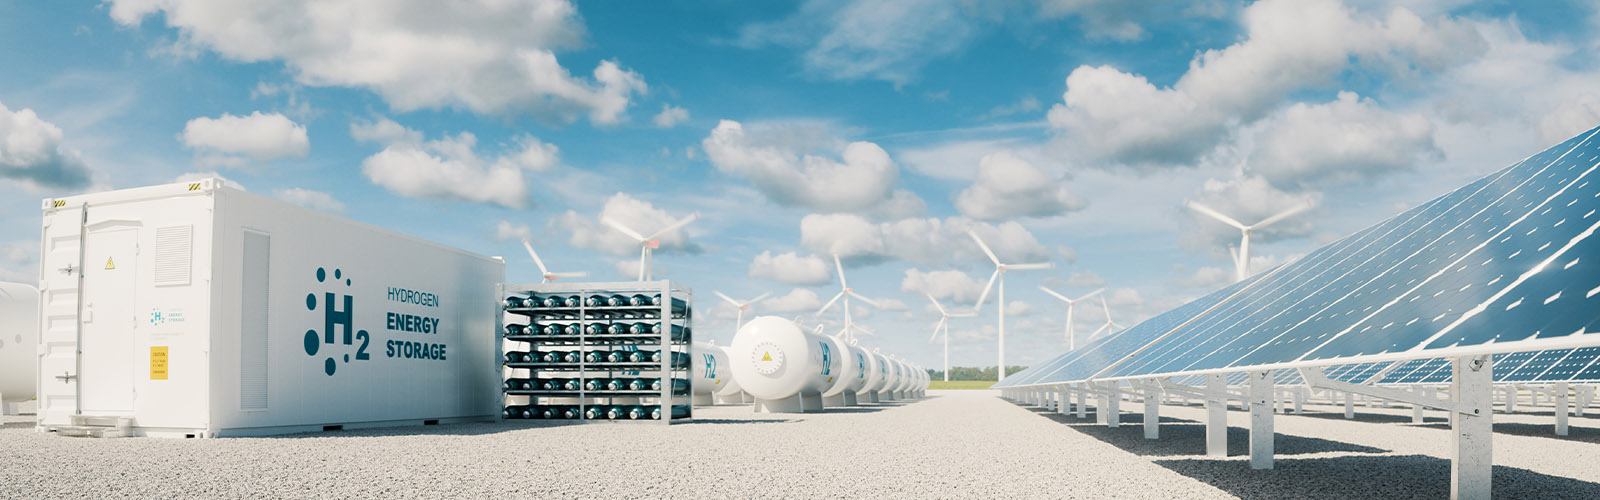 Is Clean Hydrogen the Key to Net-Zero Carbon Emissions?